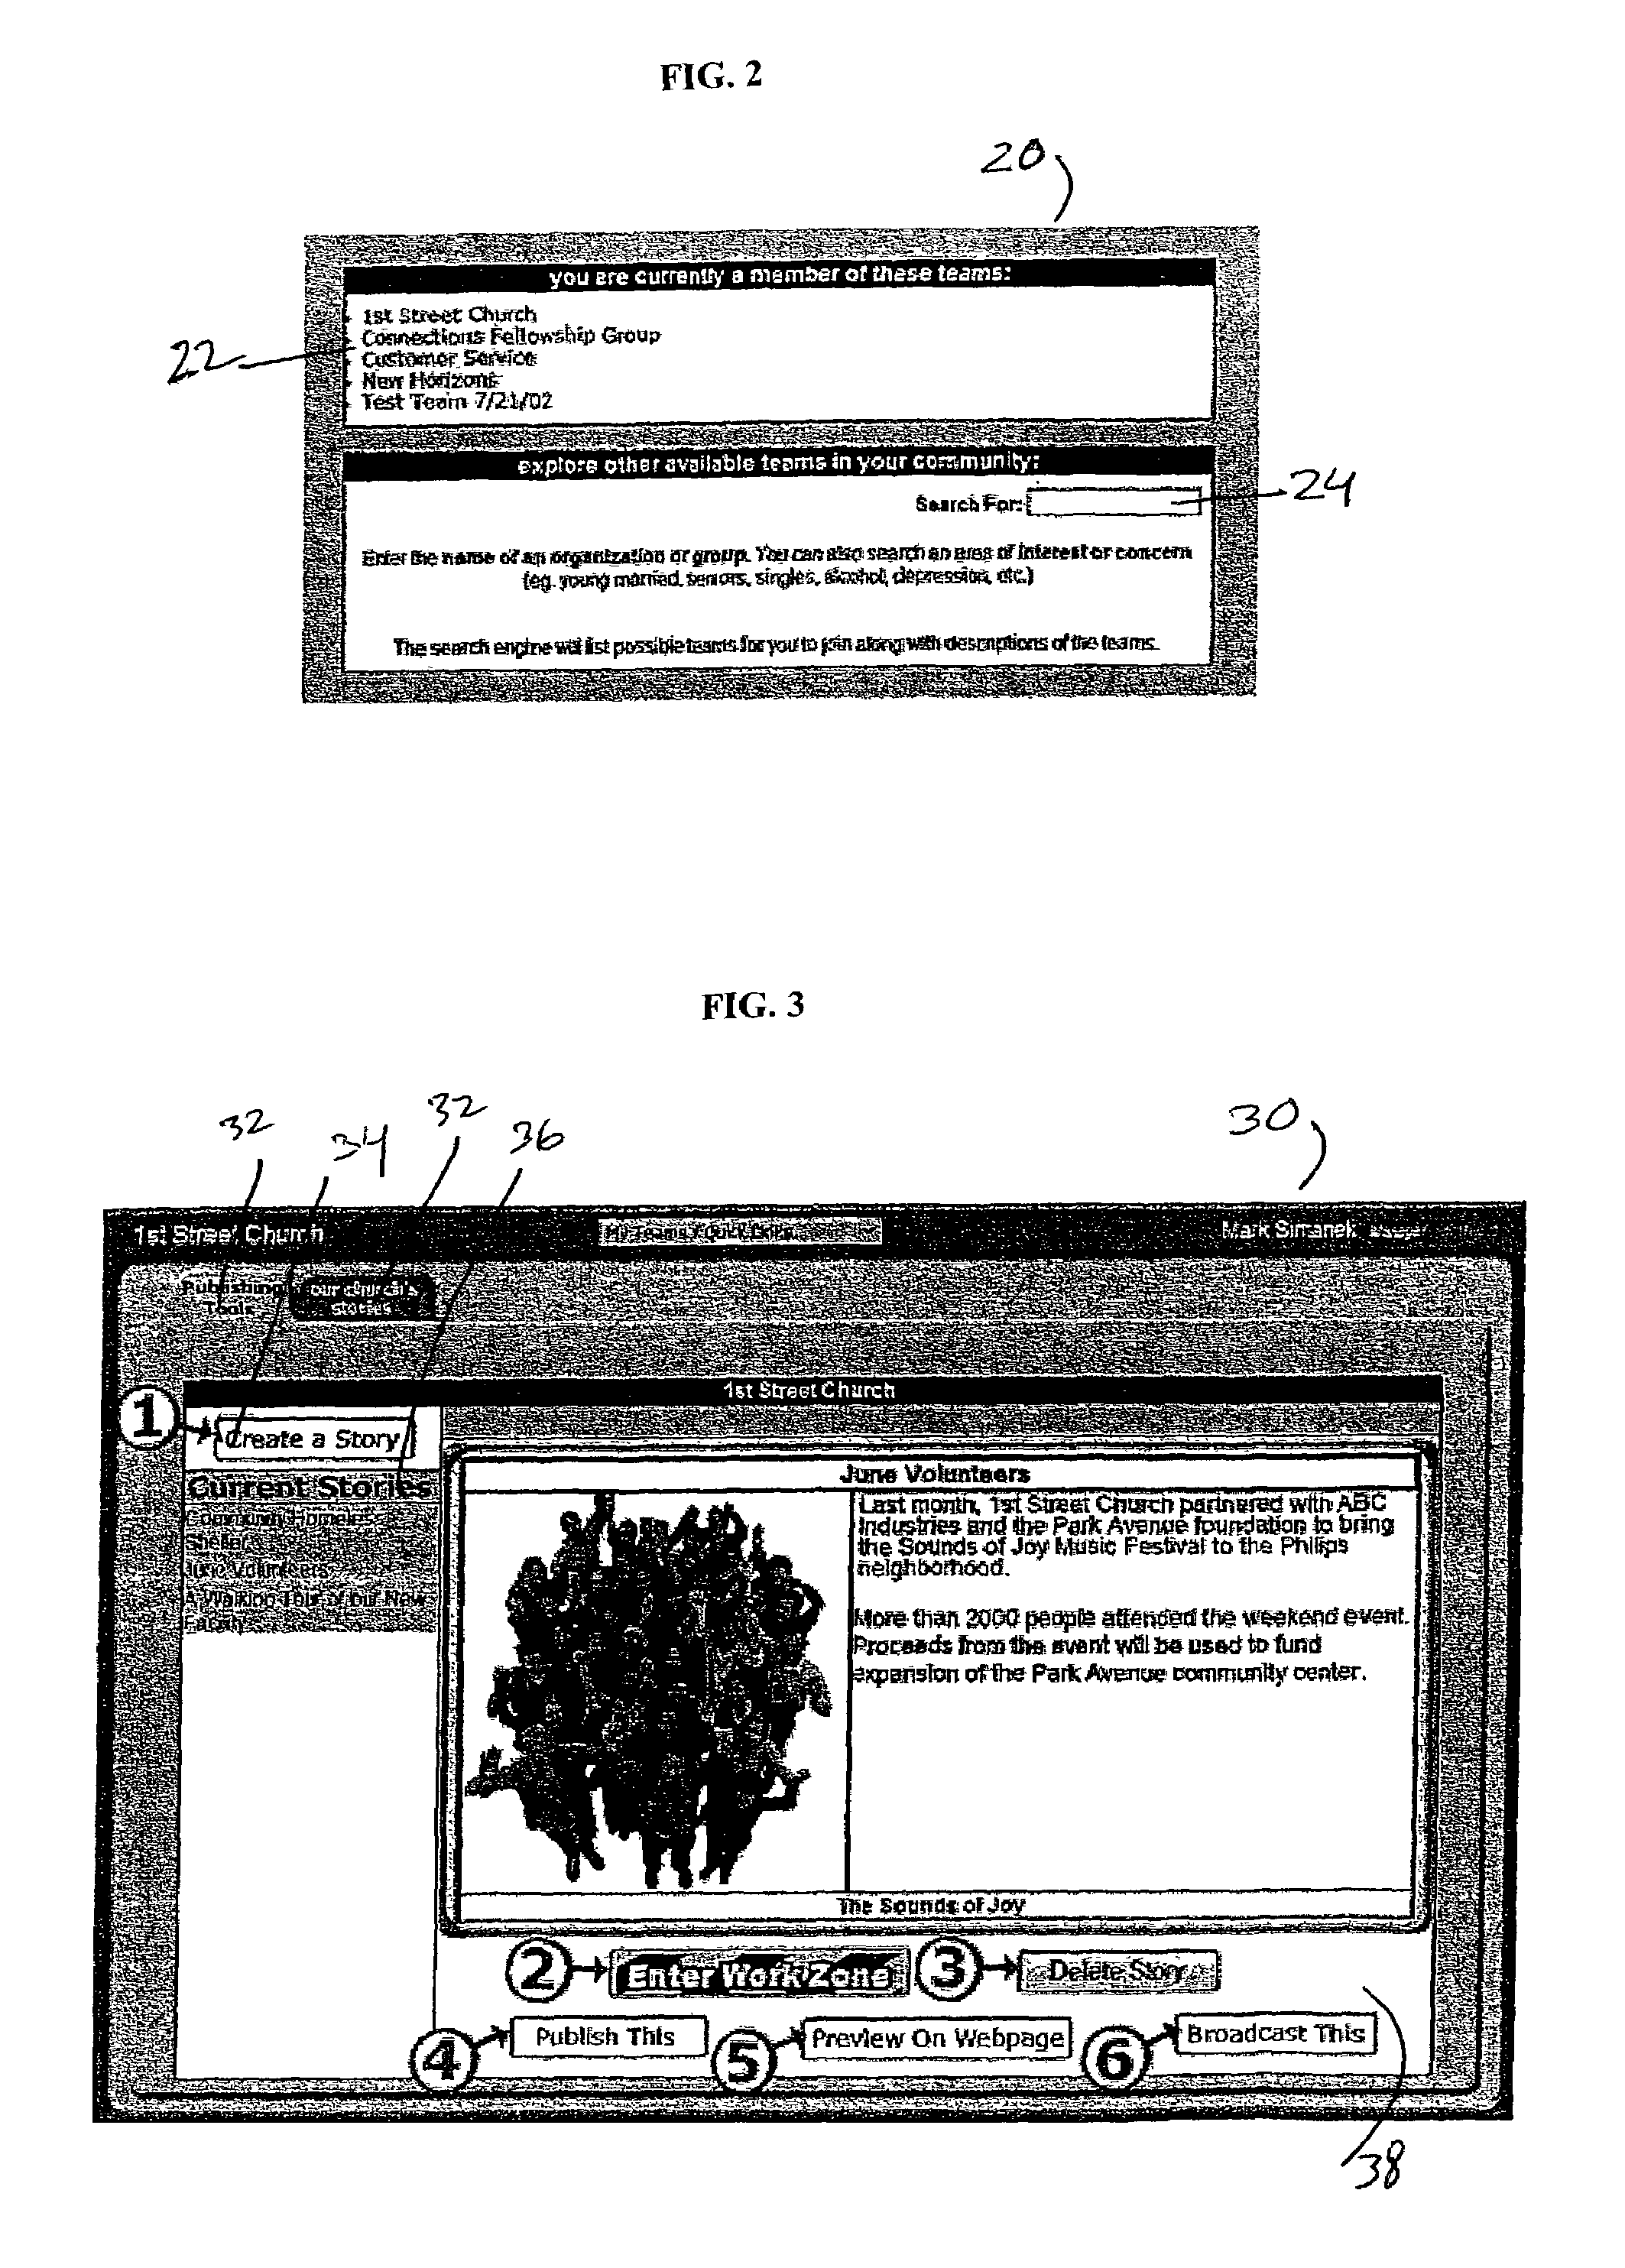 Asynchronous, networked publication and collaborative communication system